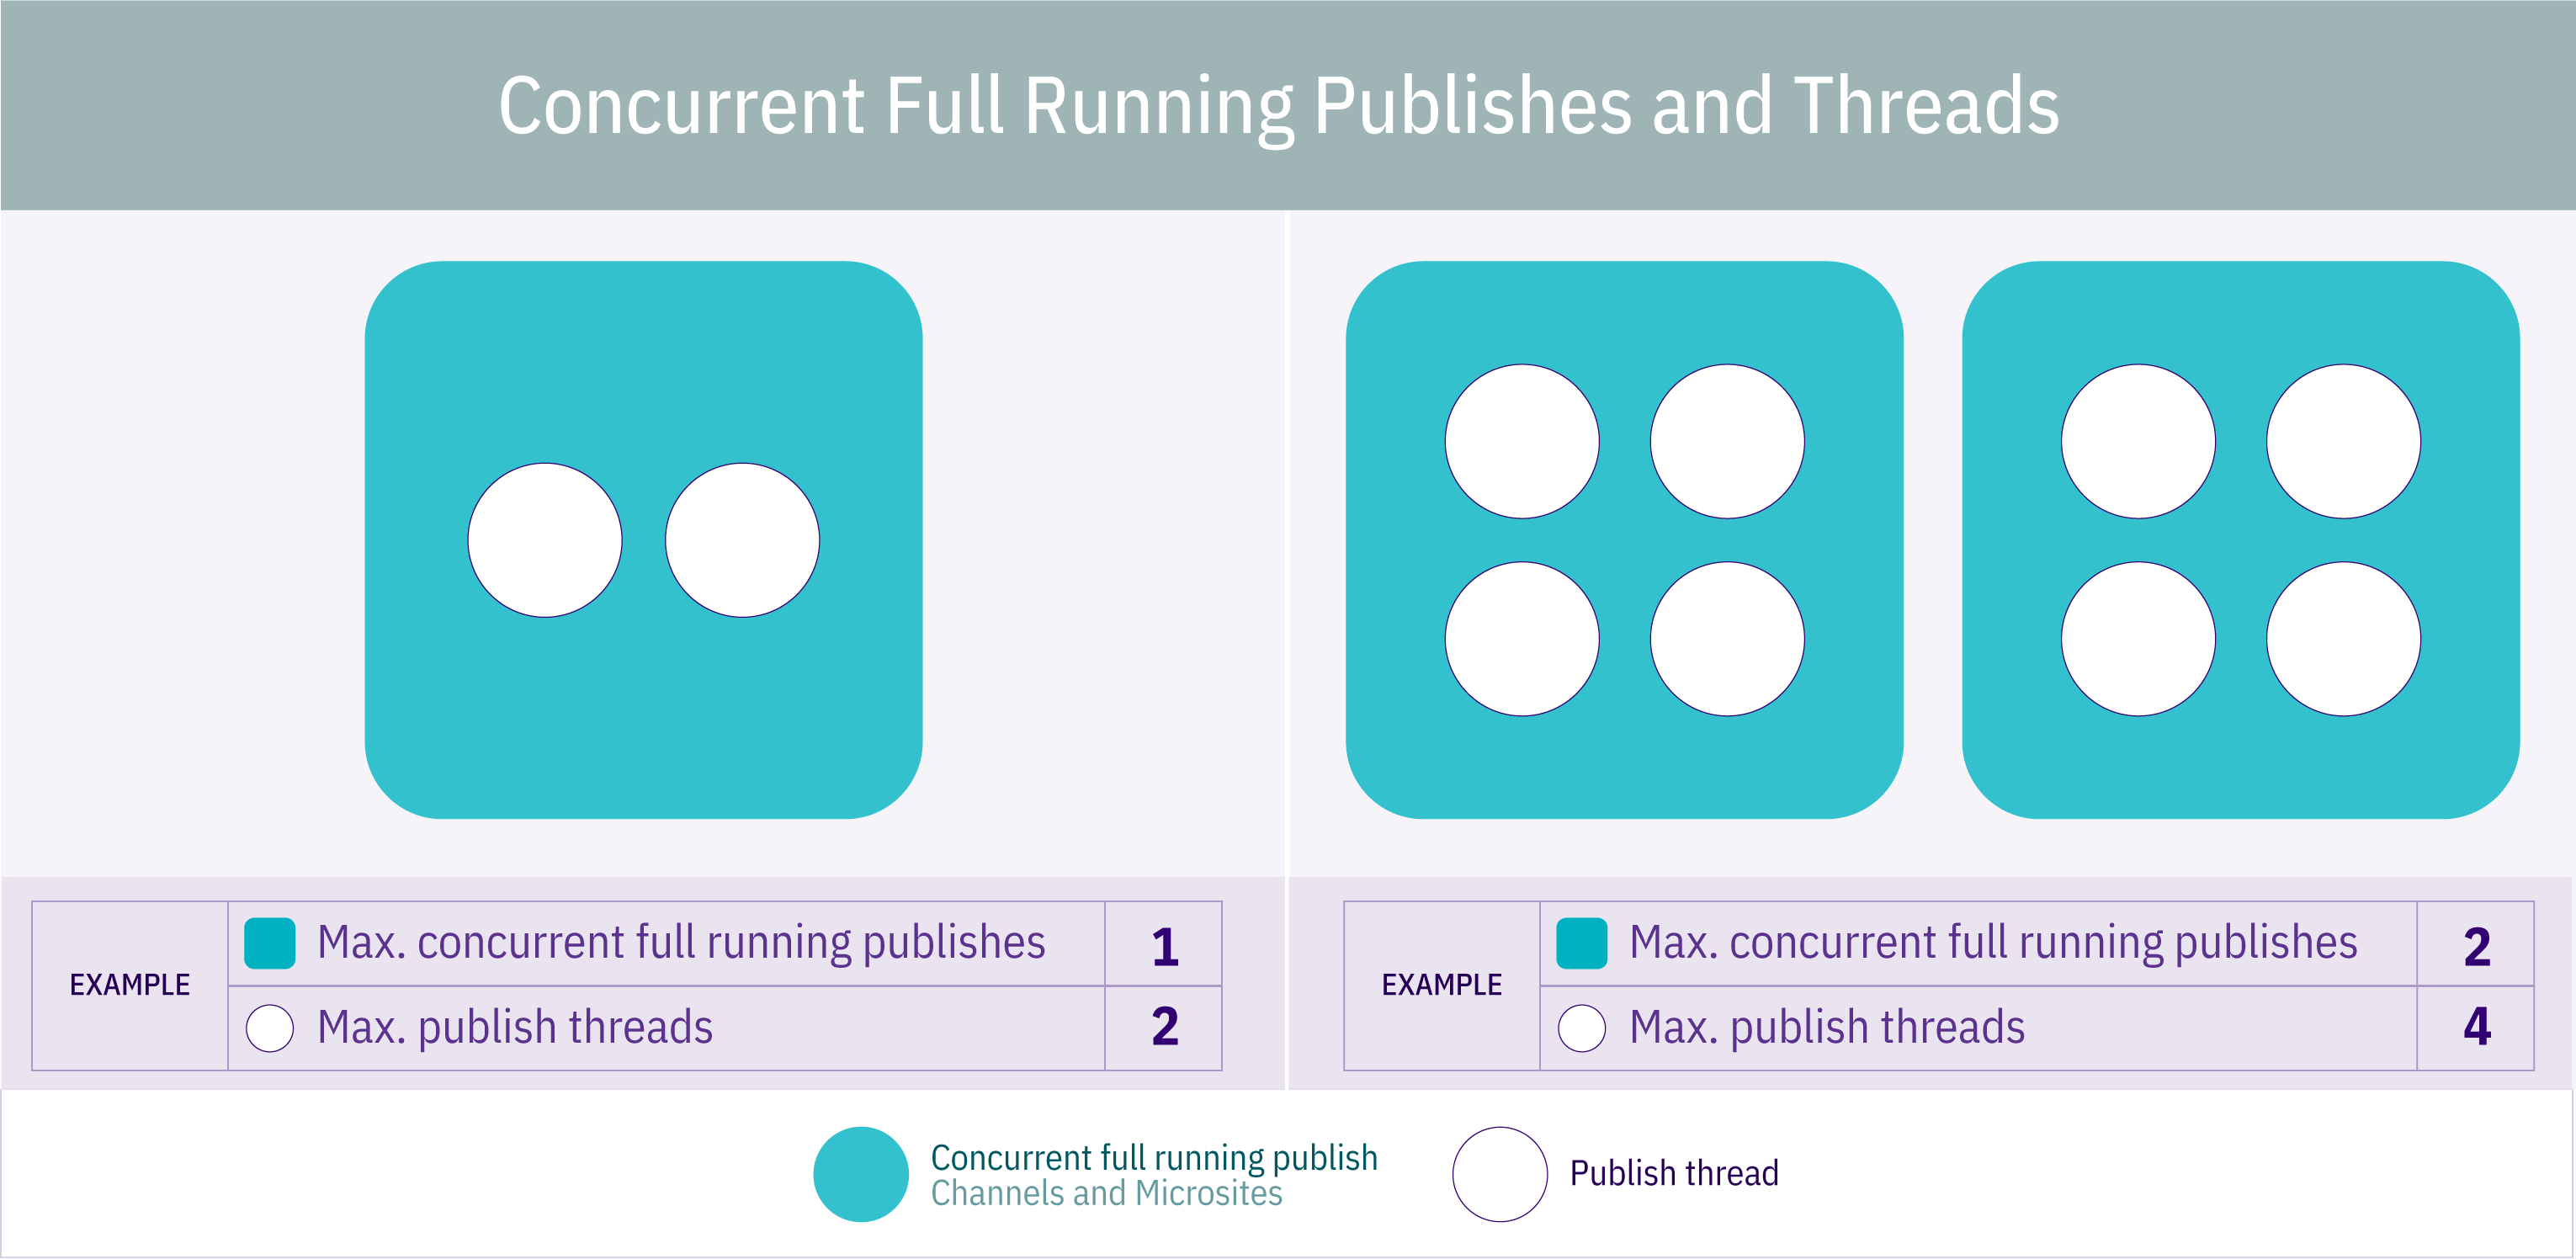 Diagram illustrating Full Running Publishes and Threads